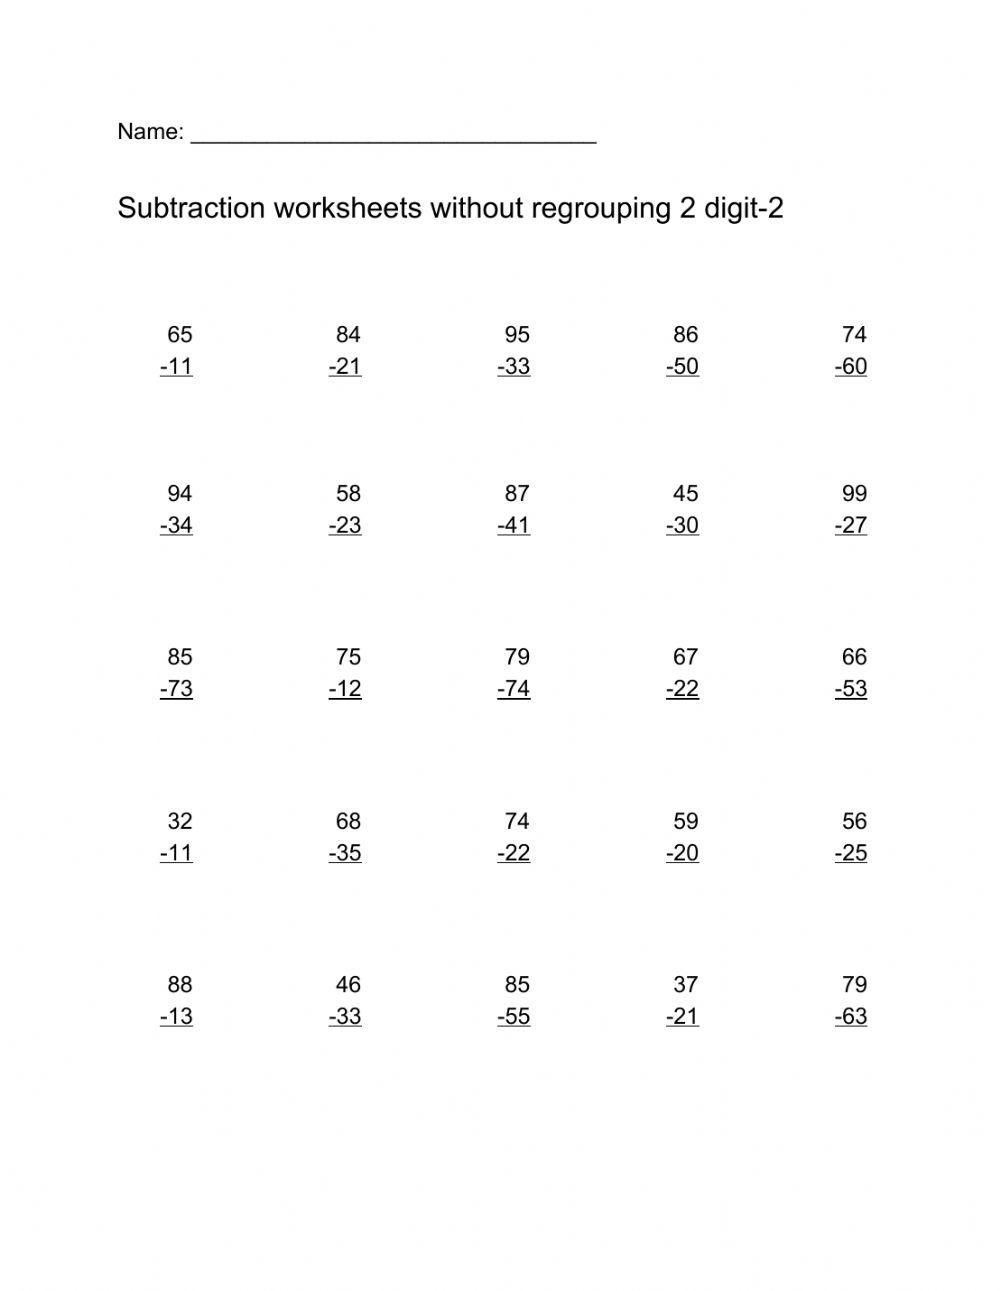 Subtraction worksheets without regrouping 2 digit-2